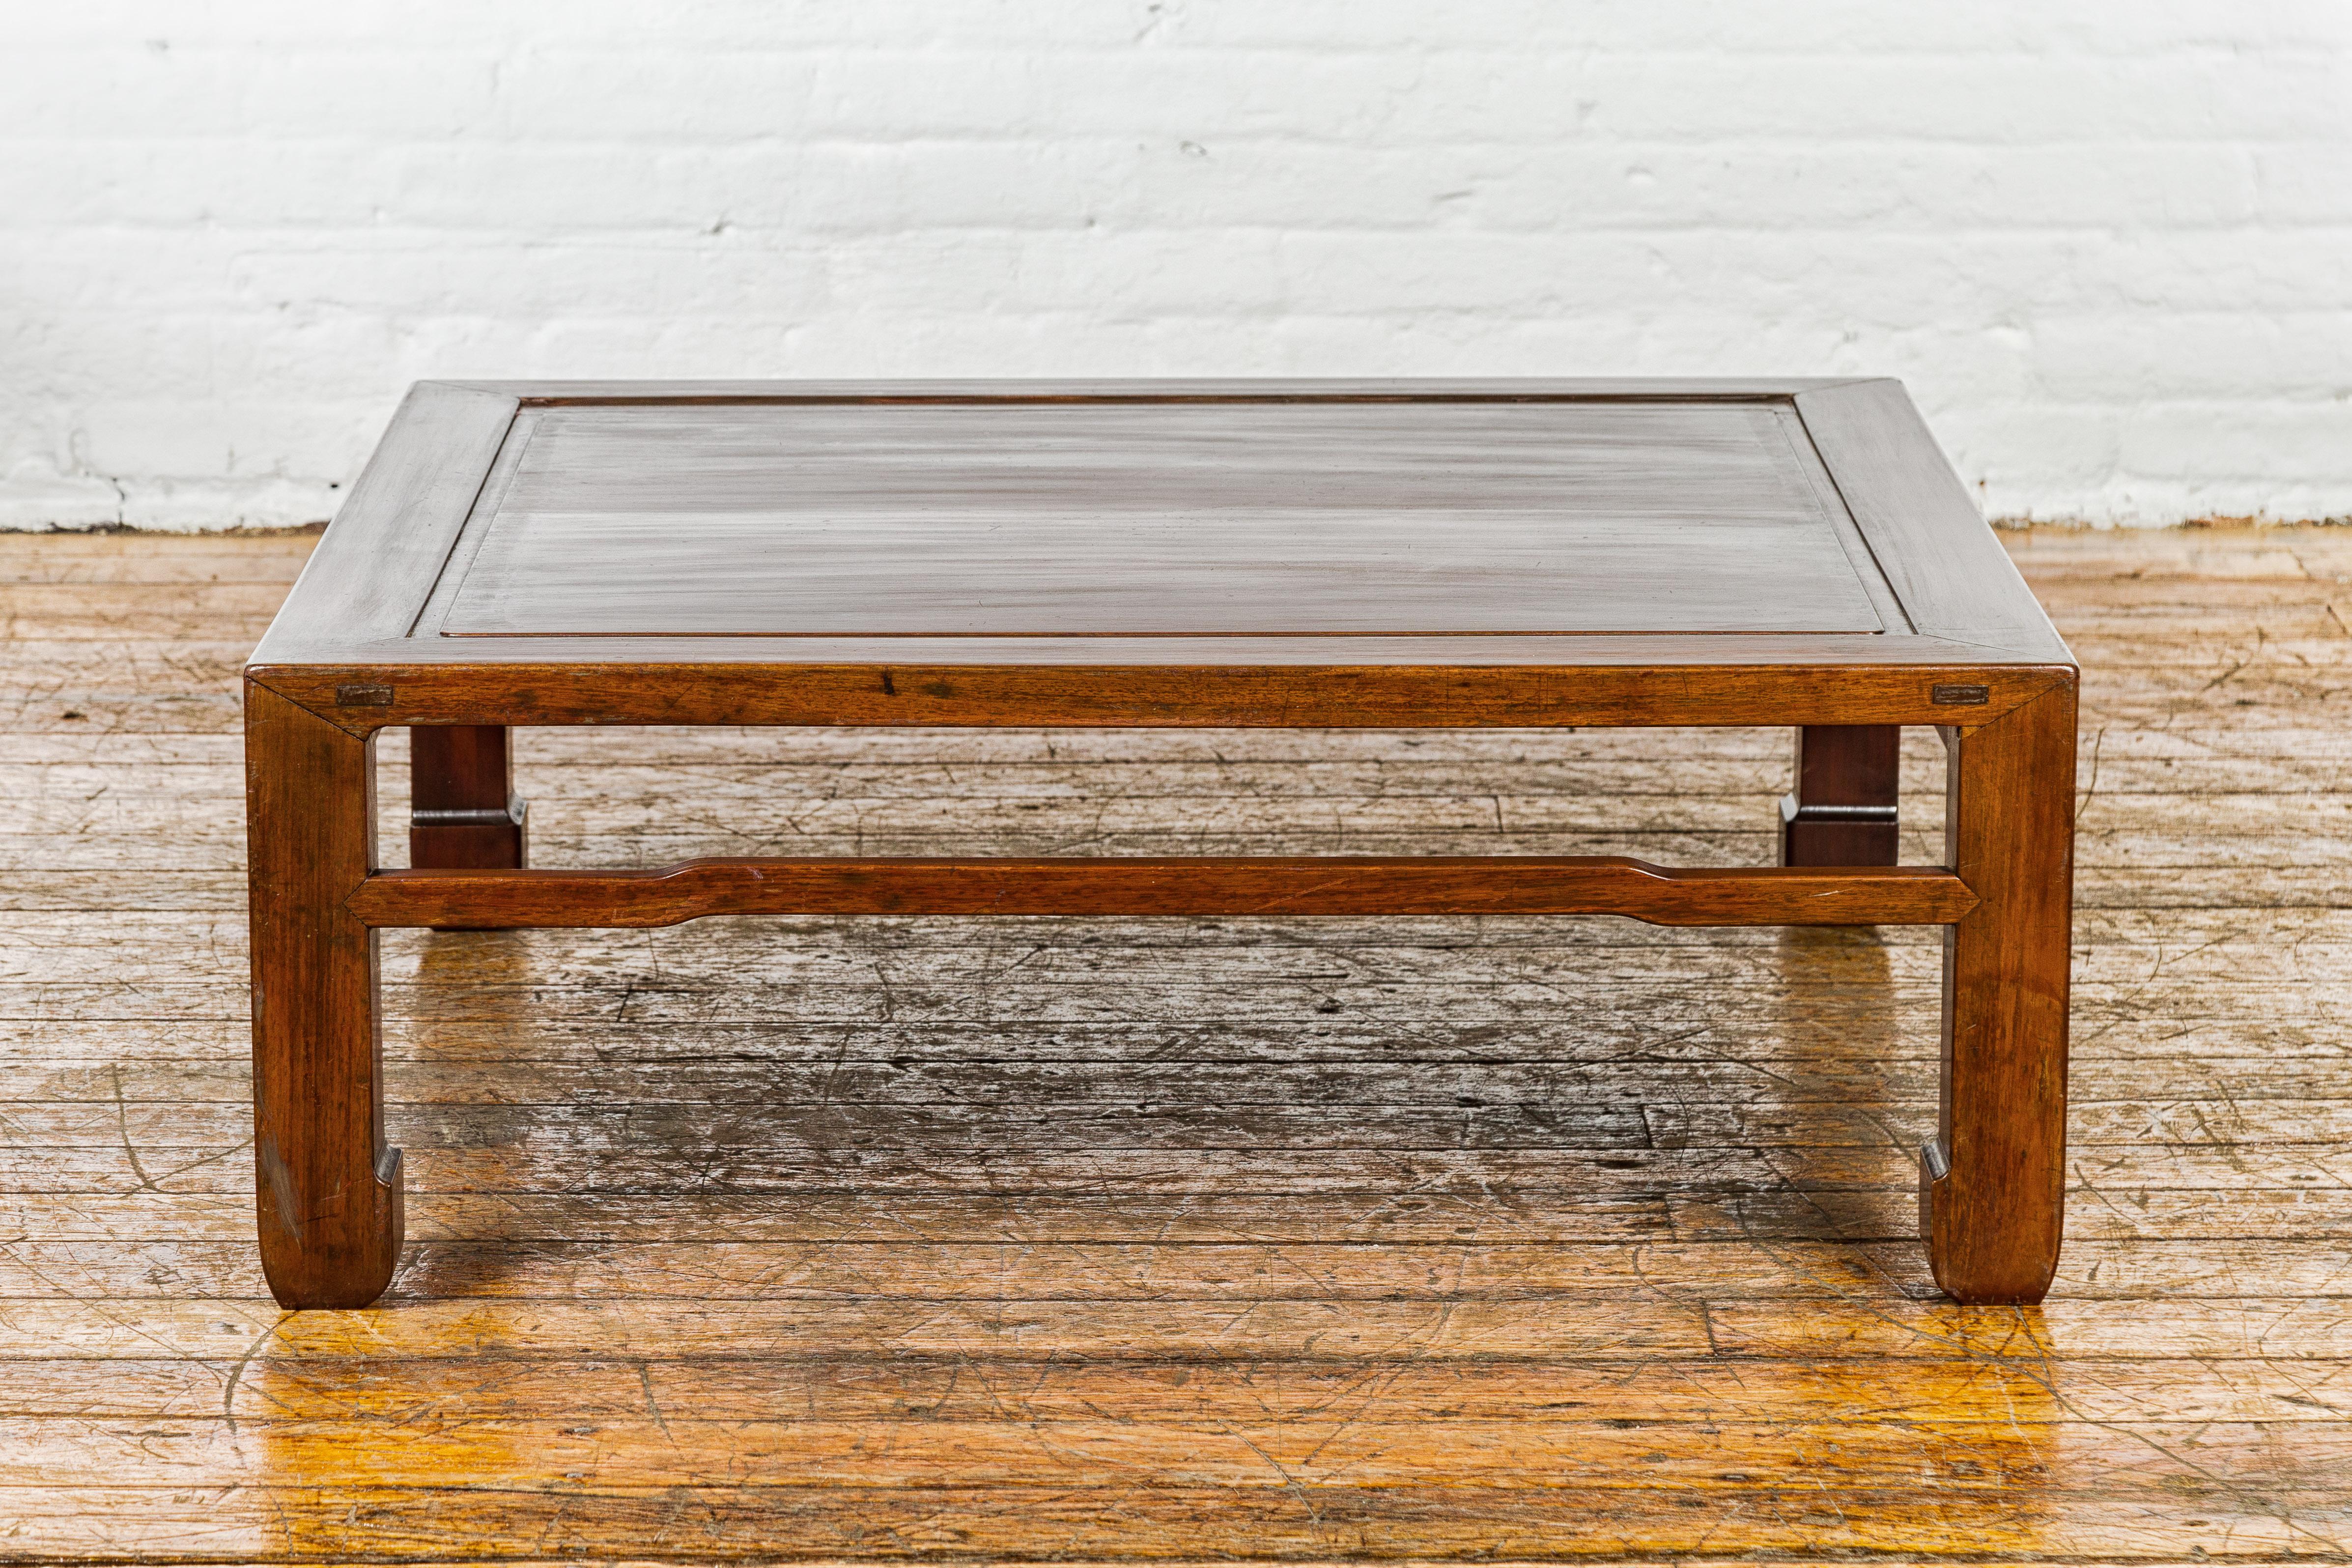 Late Qing Dynasty Square Coffee Table with Horse Hoof Legs and Stretchers For Sale 9